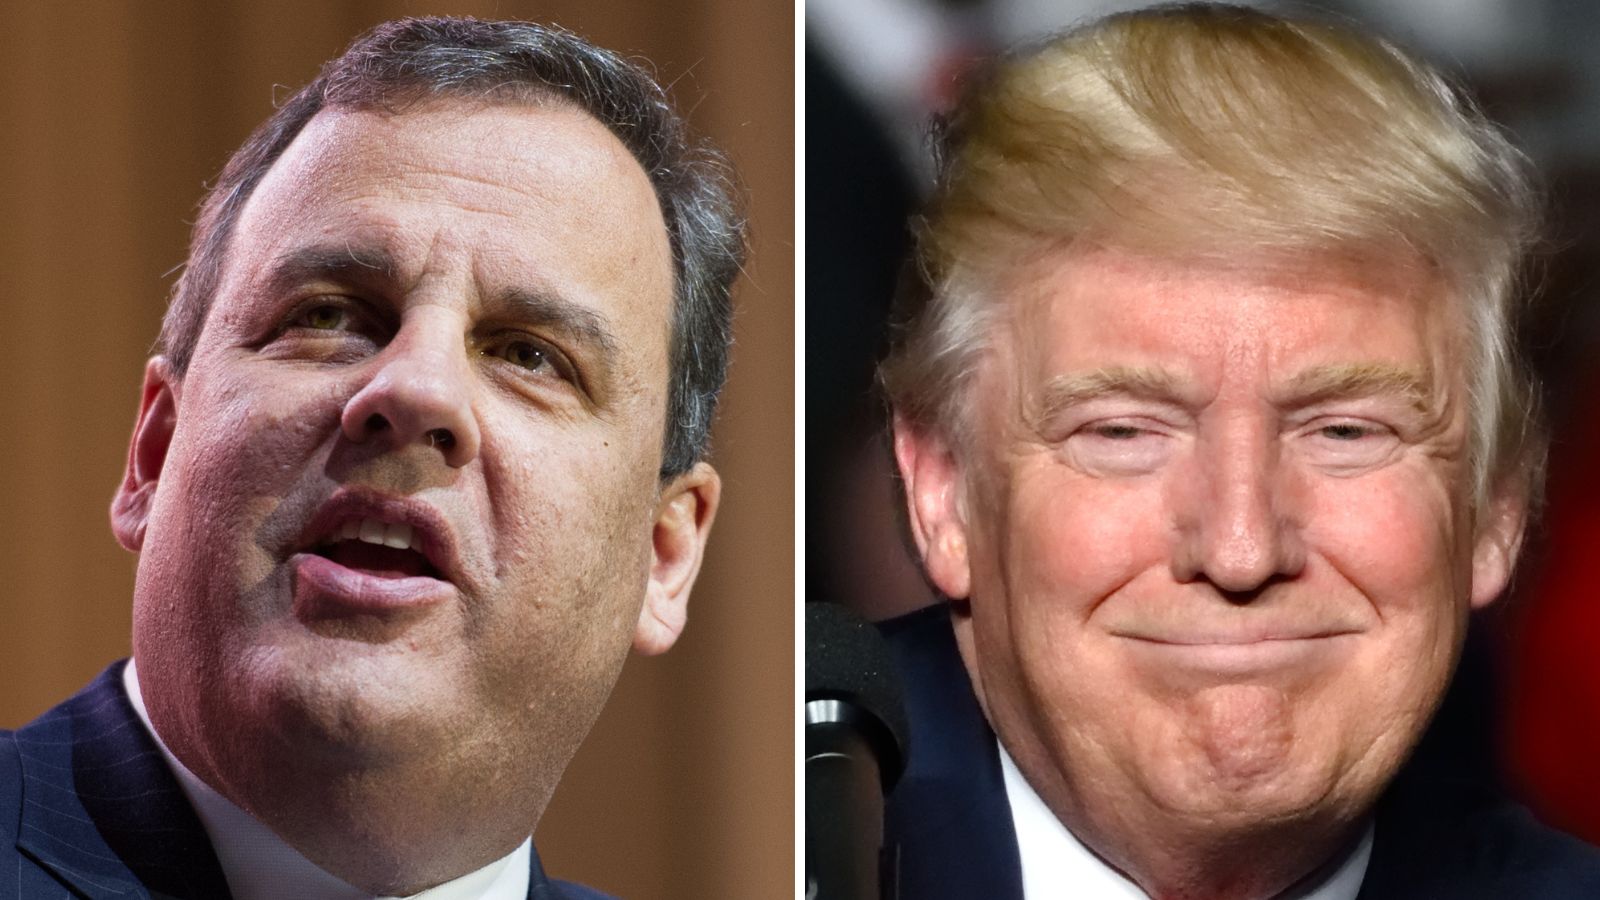 “The Fact Is, I’m the Only Person With the Guts”: Republican Chris Christie Labels Trump ‘Unfit’ for Presidential Role